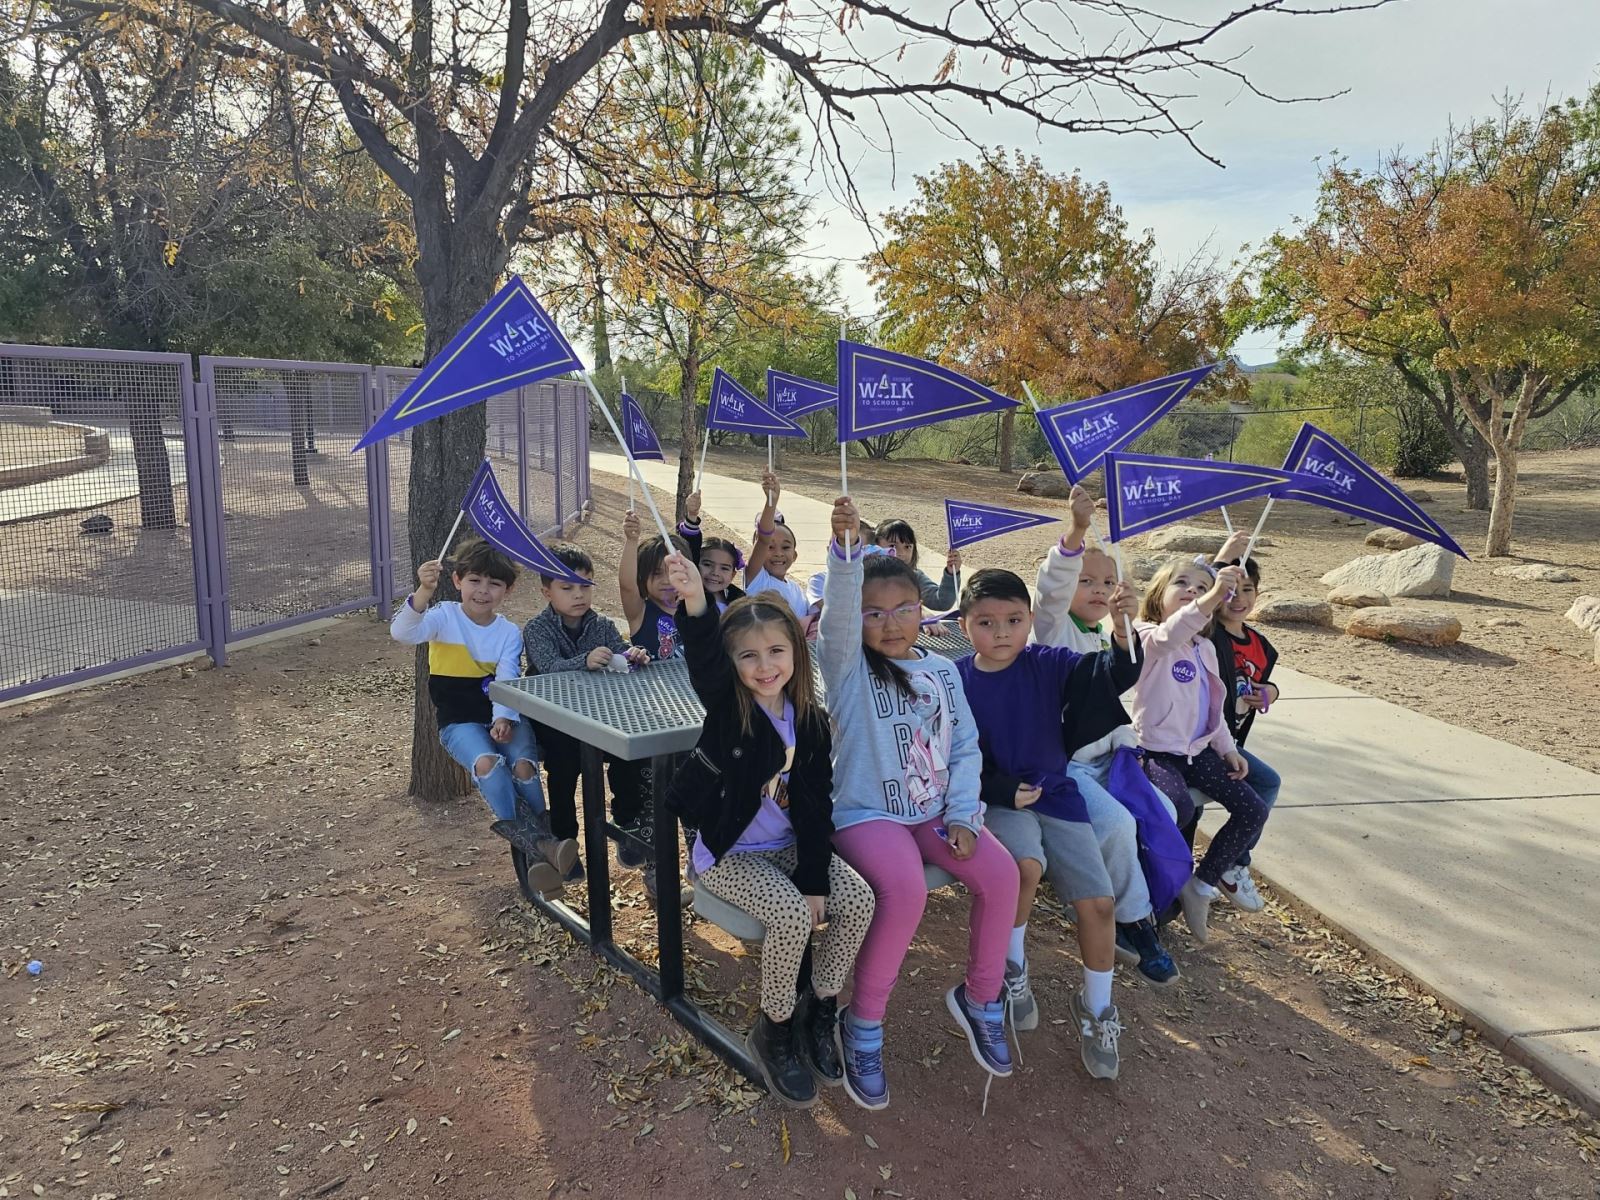 A group of students smile at a picnic table holding up their Ruby Bridges flags